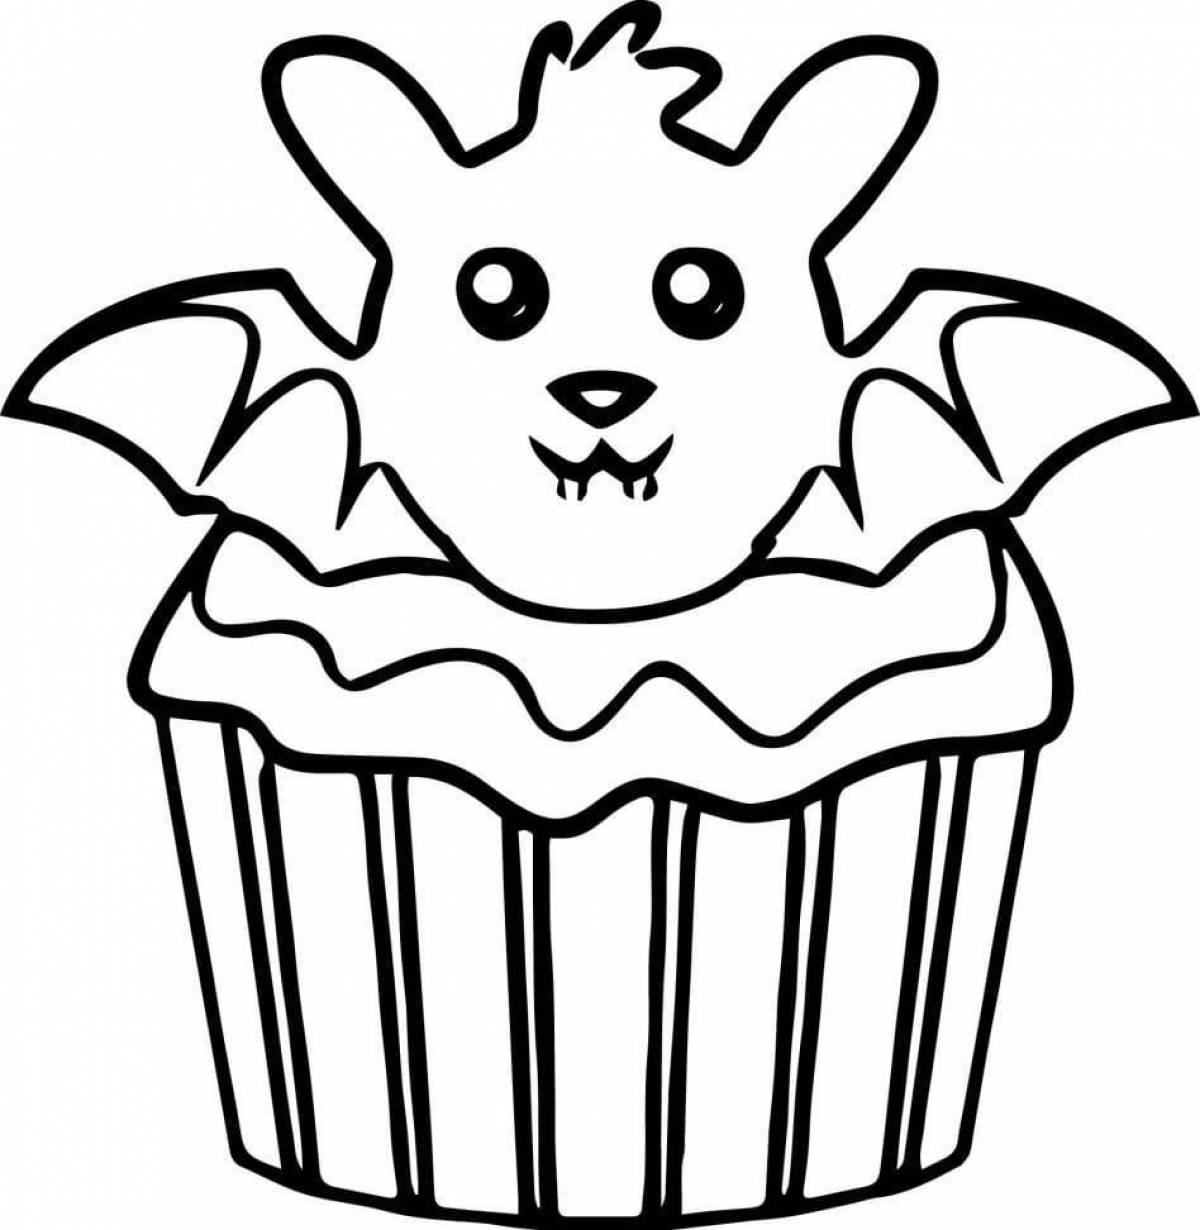 Amazing cupcake coloring page